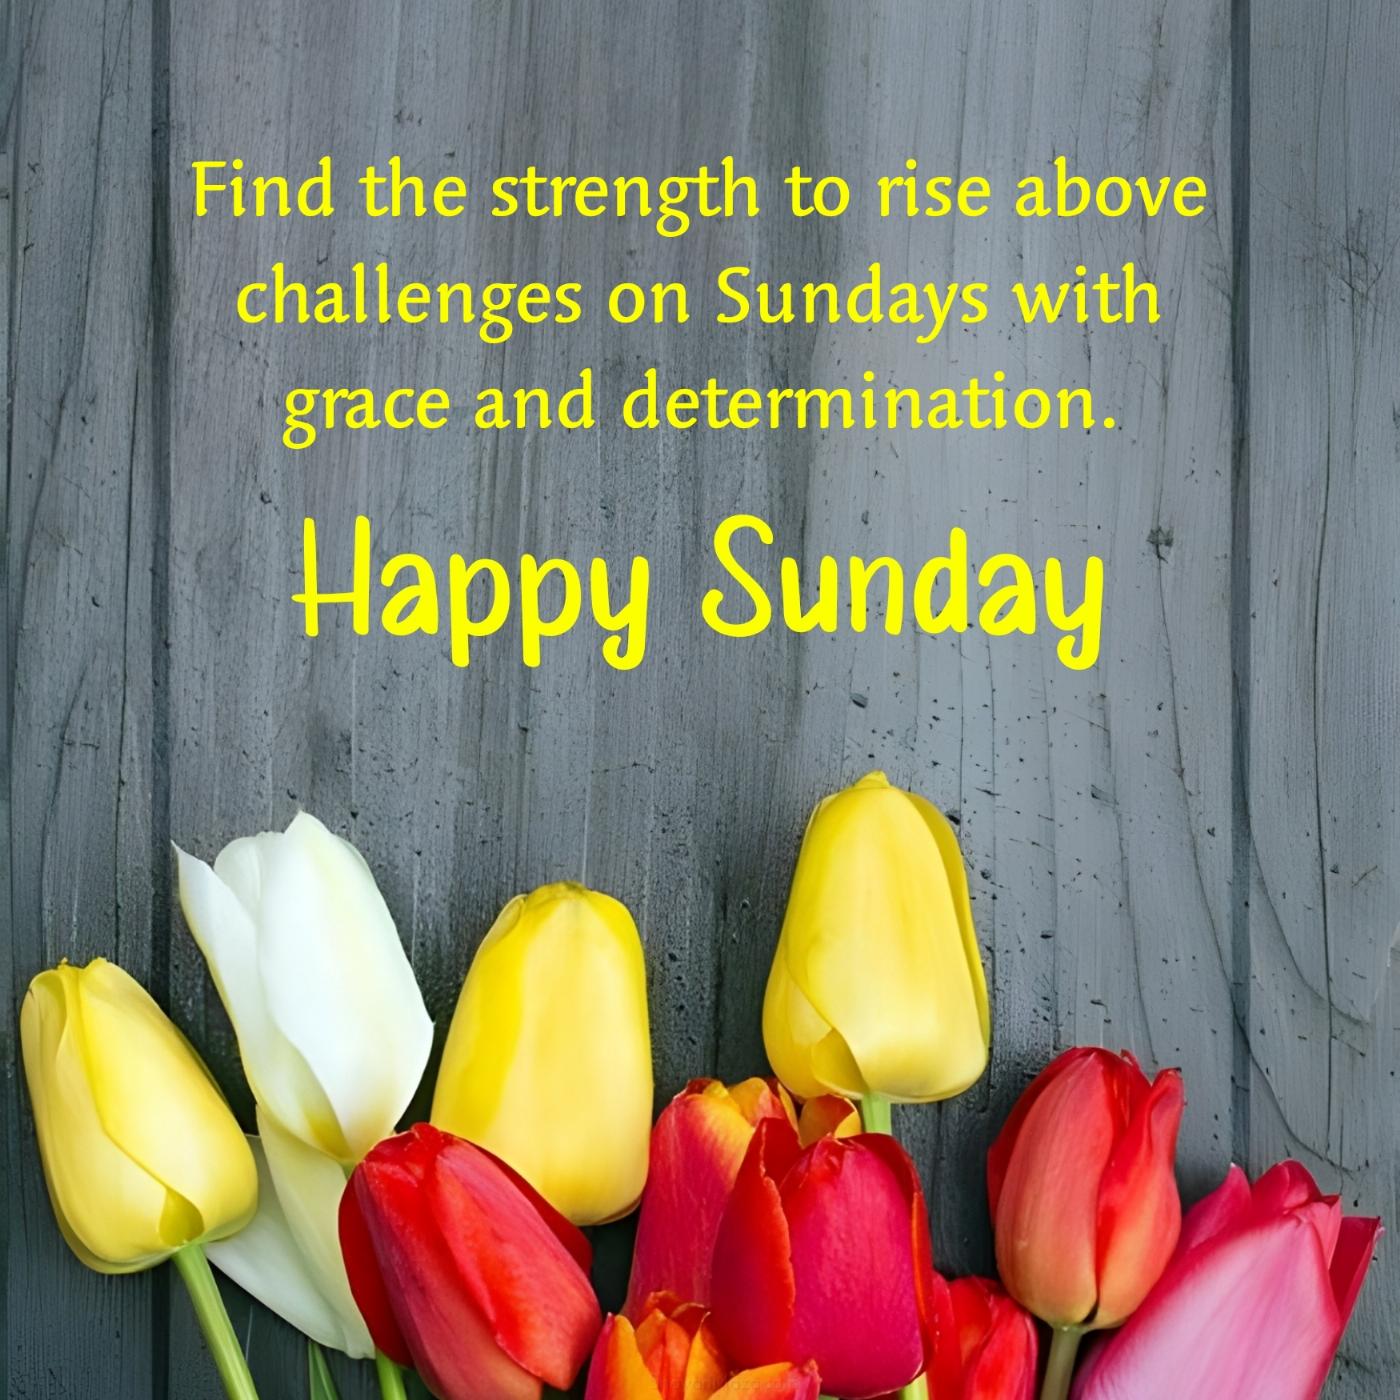 Find the strength to rise above challenges on Sundays